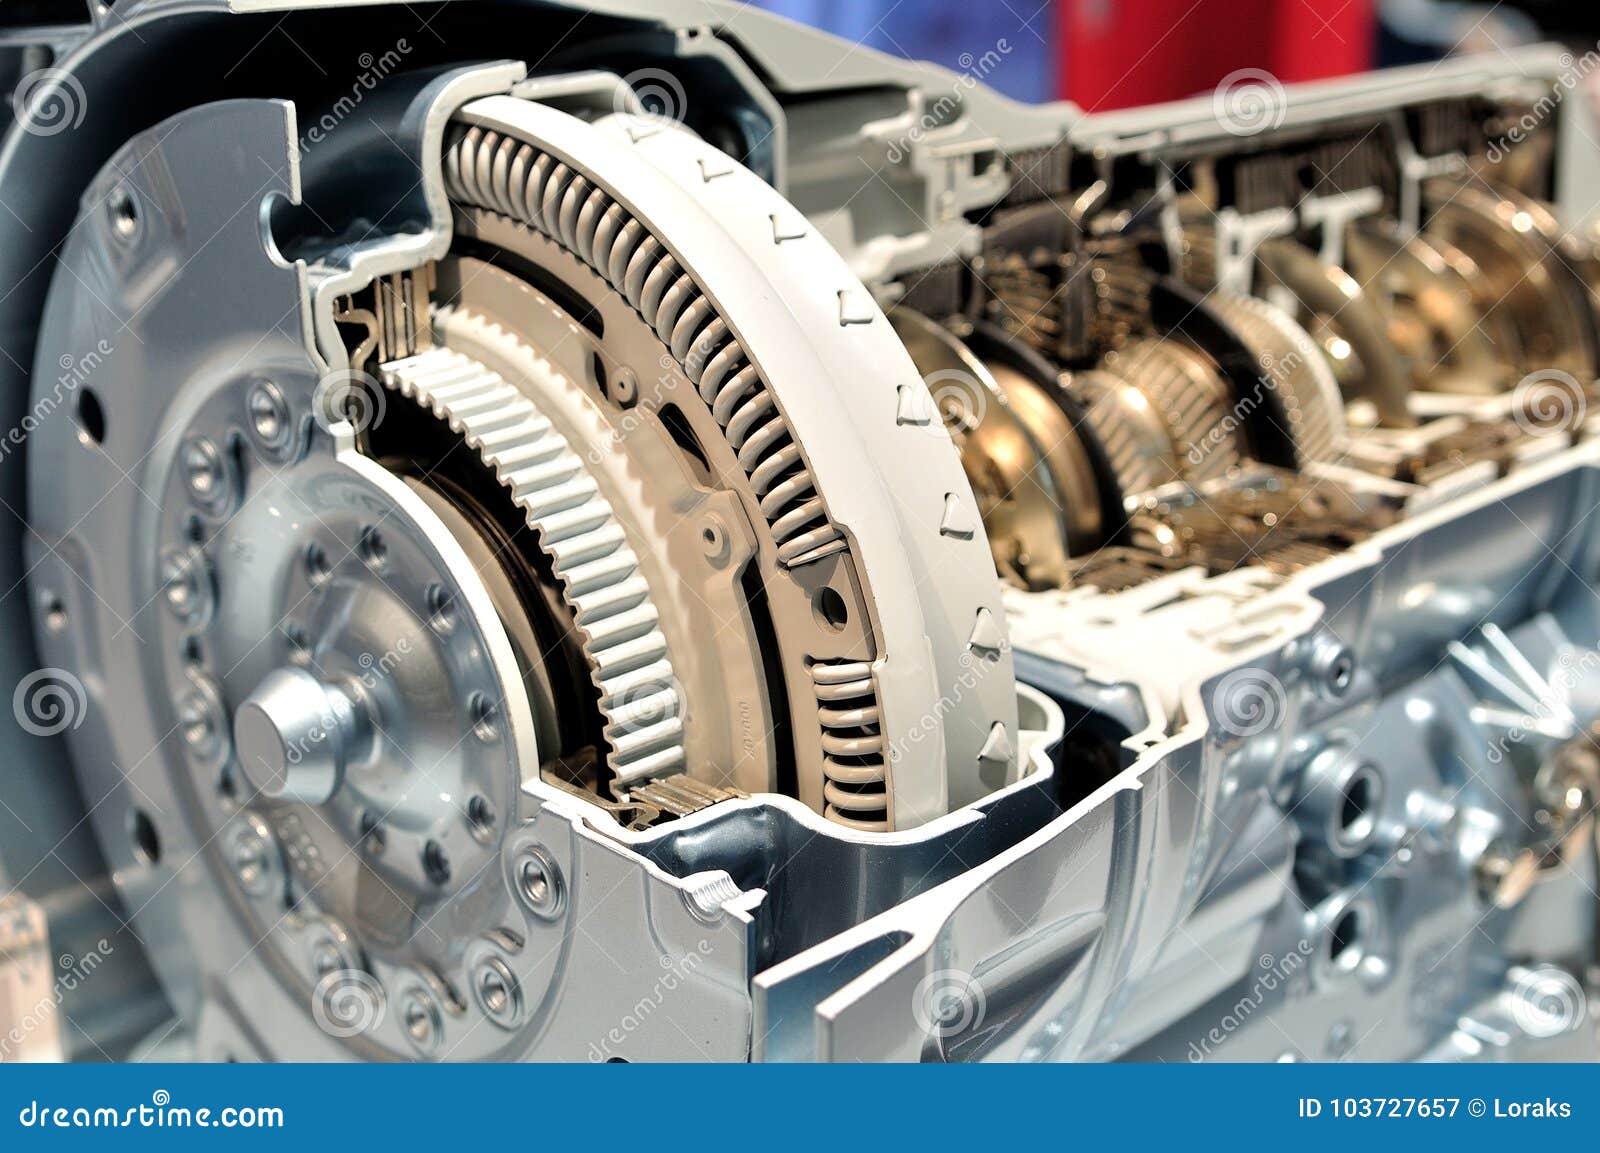 Car Gear Box with Automatic Transmission. Stock Image - Image of